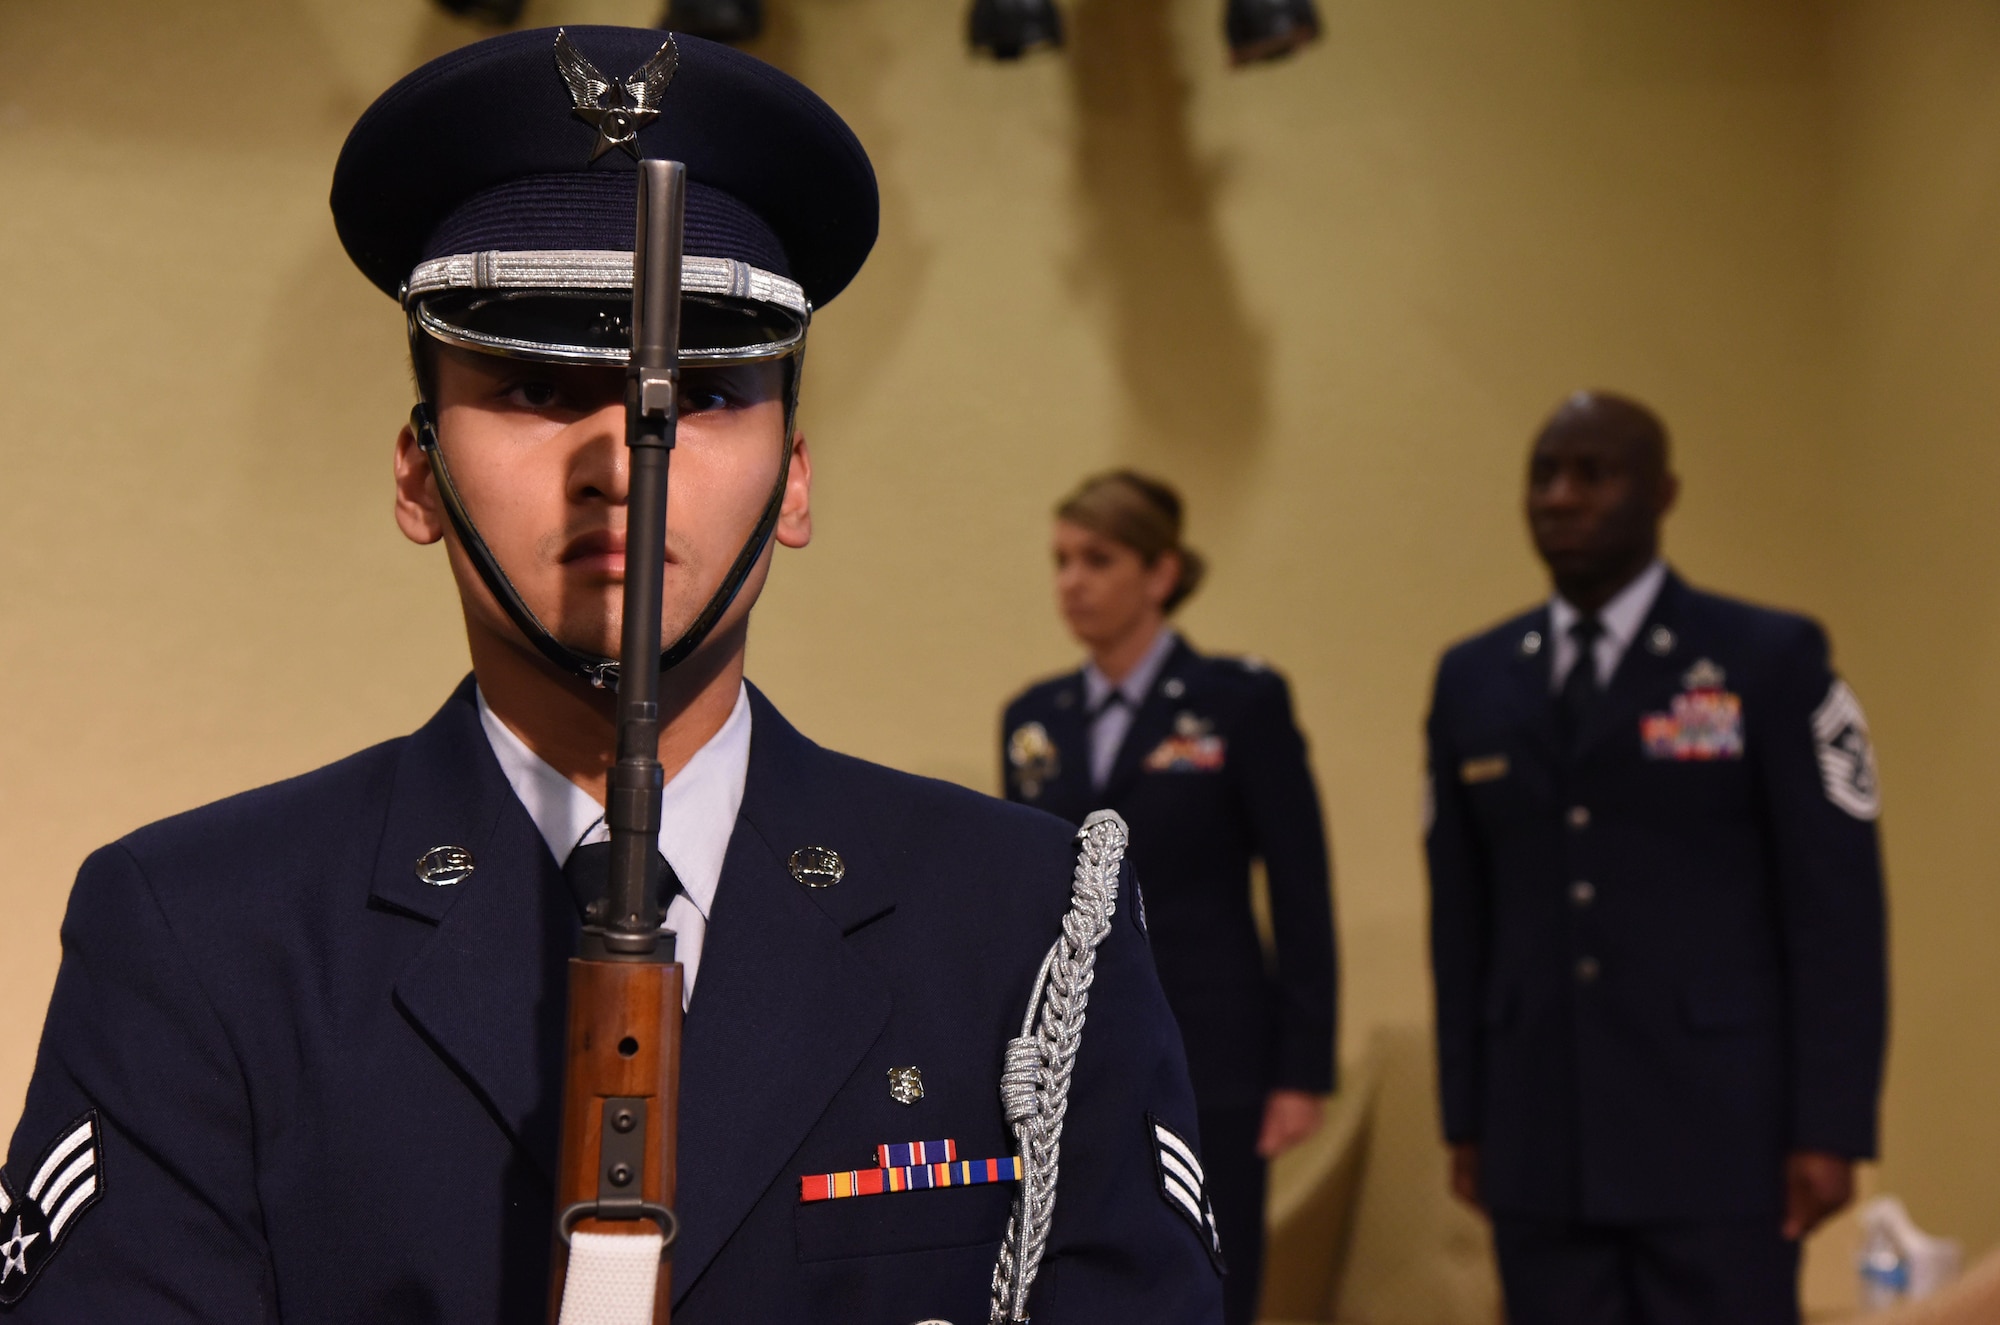 Senior Airman Anthony Balancio, Keesler Honor Guard member, presents the colors during a retirement ceremony for Chief Master Sgt. Vegas Clark, 81st Training Wing command chief, in the Bay Breeze Event Center Aug. 11, 2017, on Keesler Air Force Base, Miss. Clark retired with 22 years of military service. Prior to his assignment at Keesler he served as the command chief for the 39th Air Base Wing, Incirlik Air Base, Turkey. (U.S. Air Force photo by Kemberly Groue)